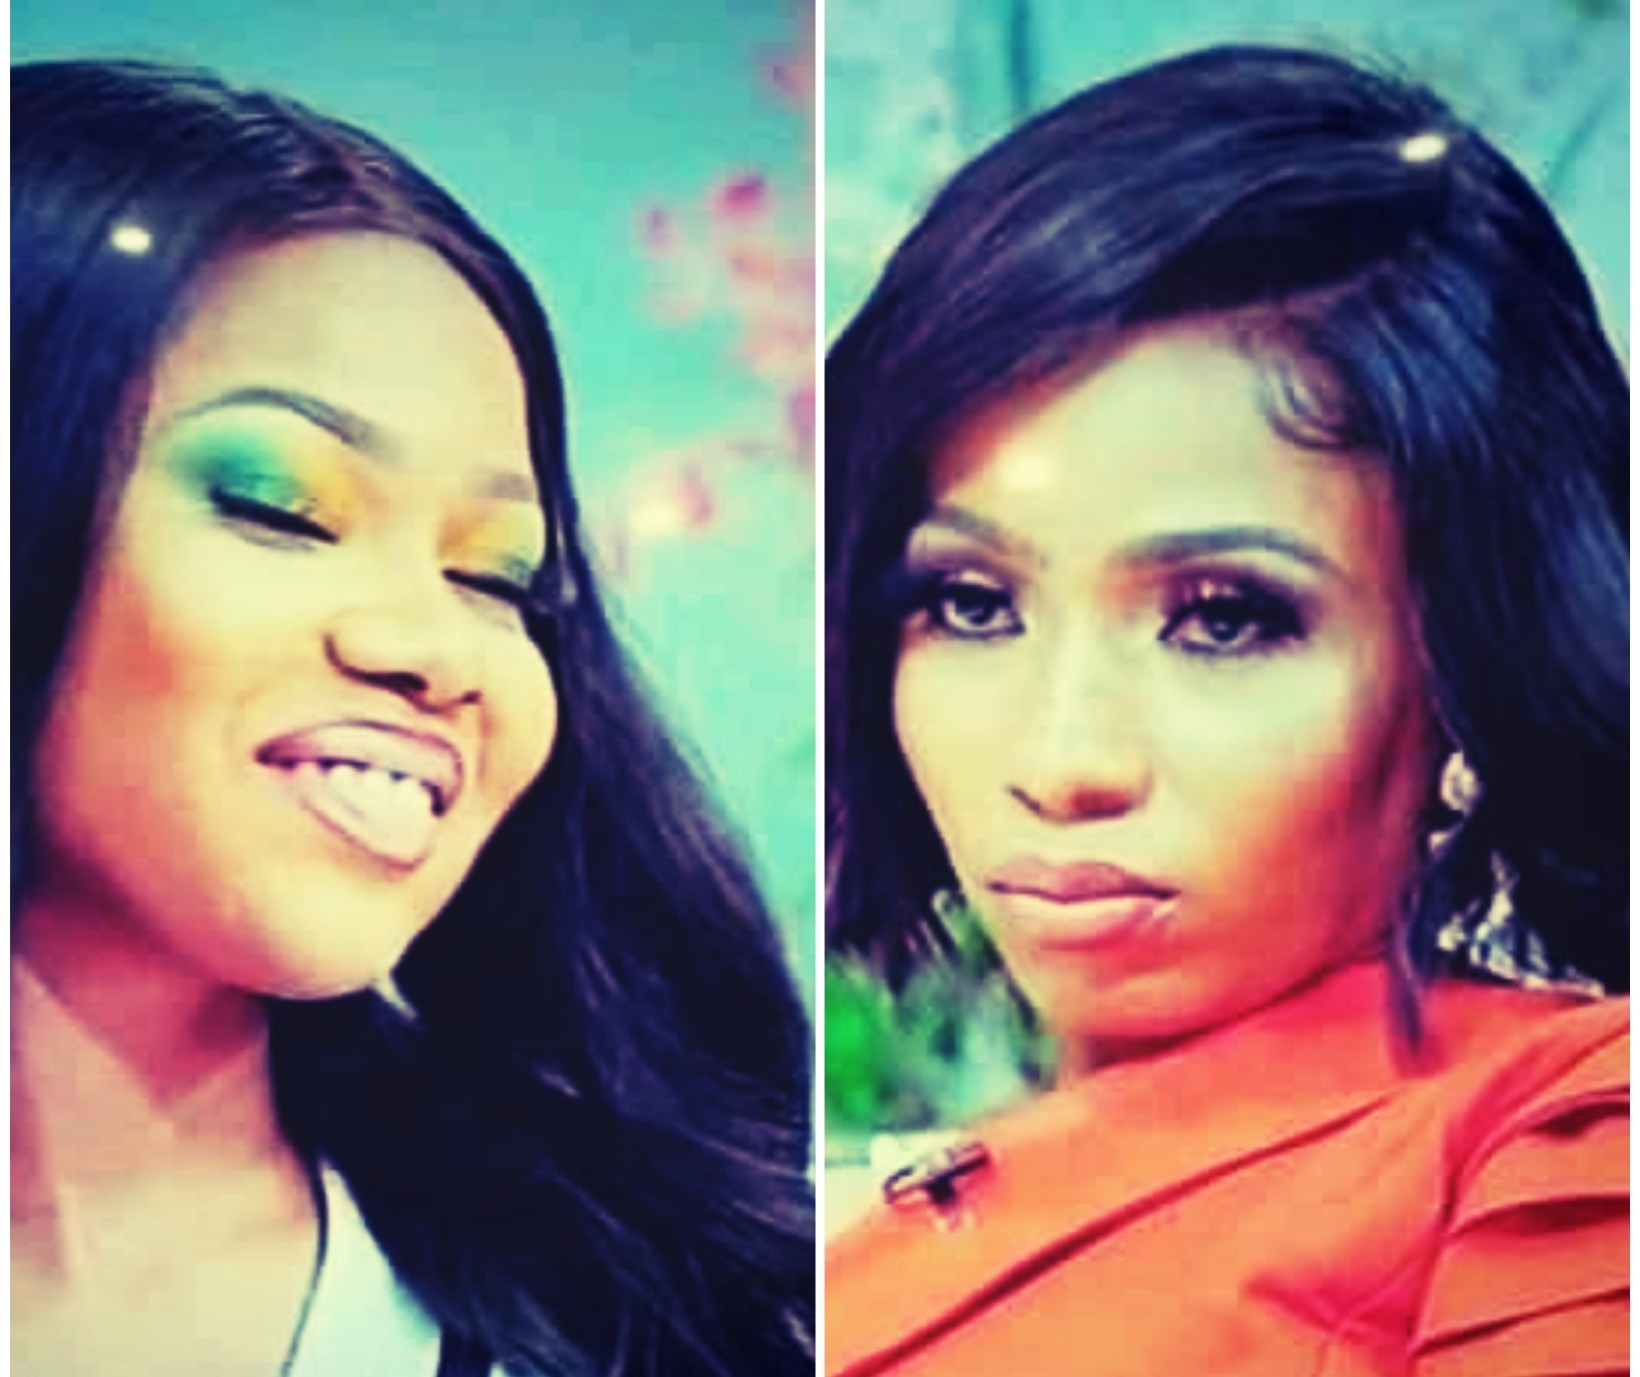 #BBNReunion2020: Fans splits Between Tacha and Mercy over facial expression